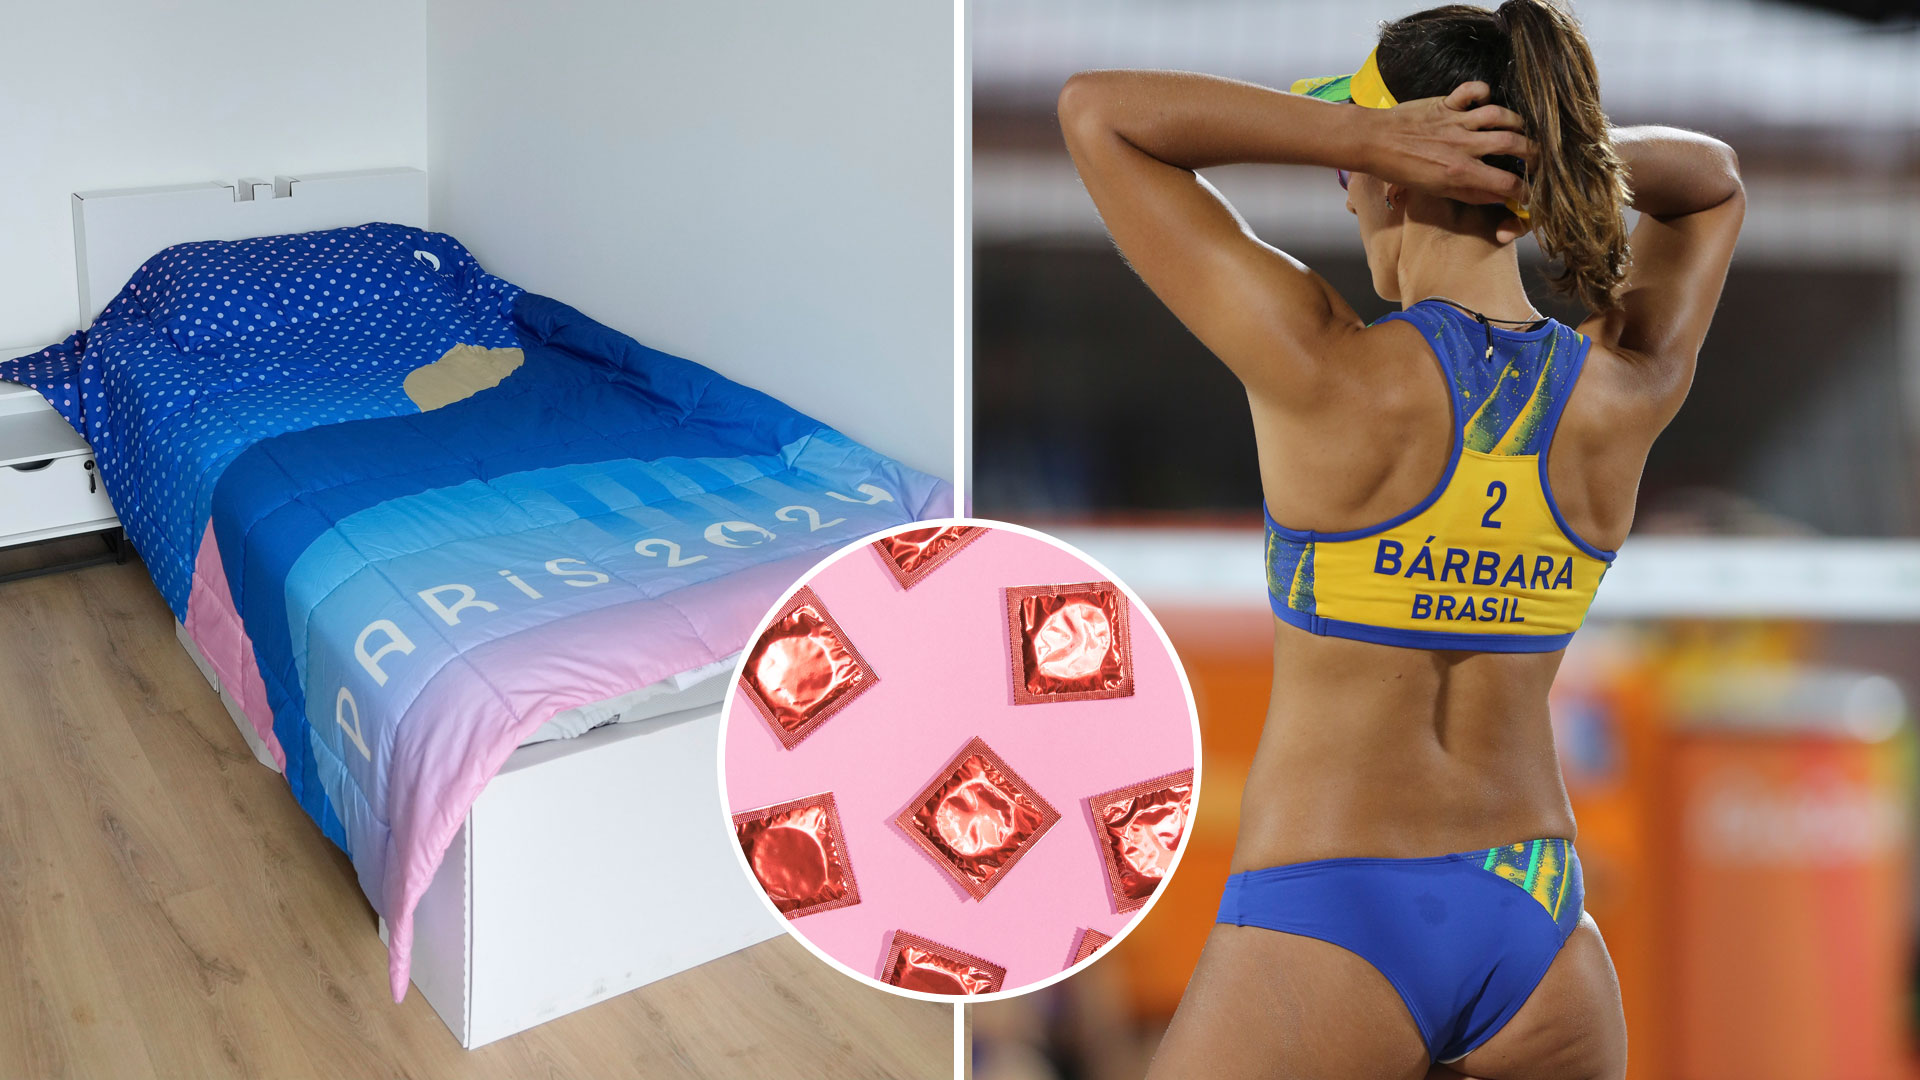 Experience the Inside Scoop on Paris 2024 Olympic Village: No ‘intimacy ban’, 300,000 Condoms, and Cardboard Beds Revealed!